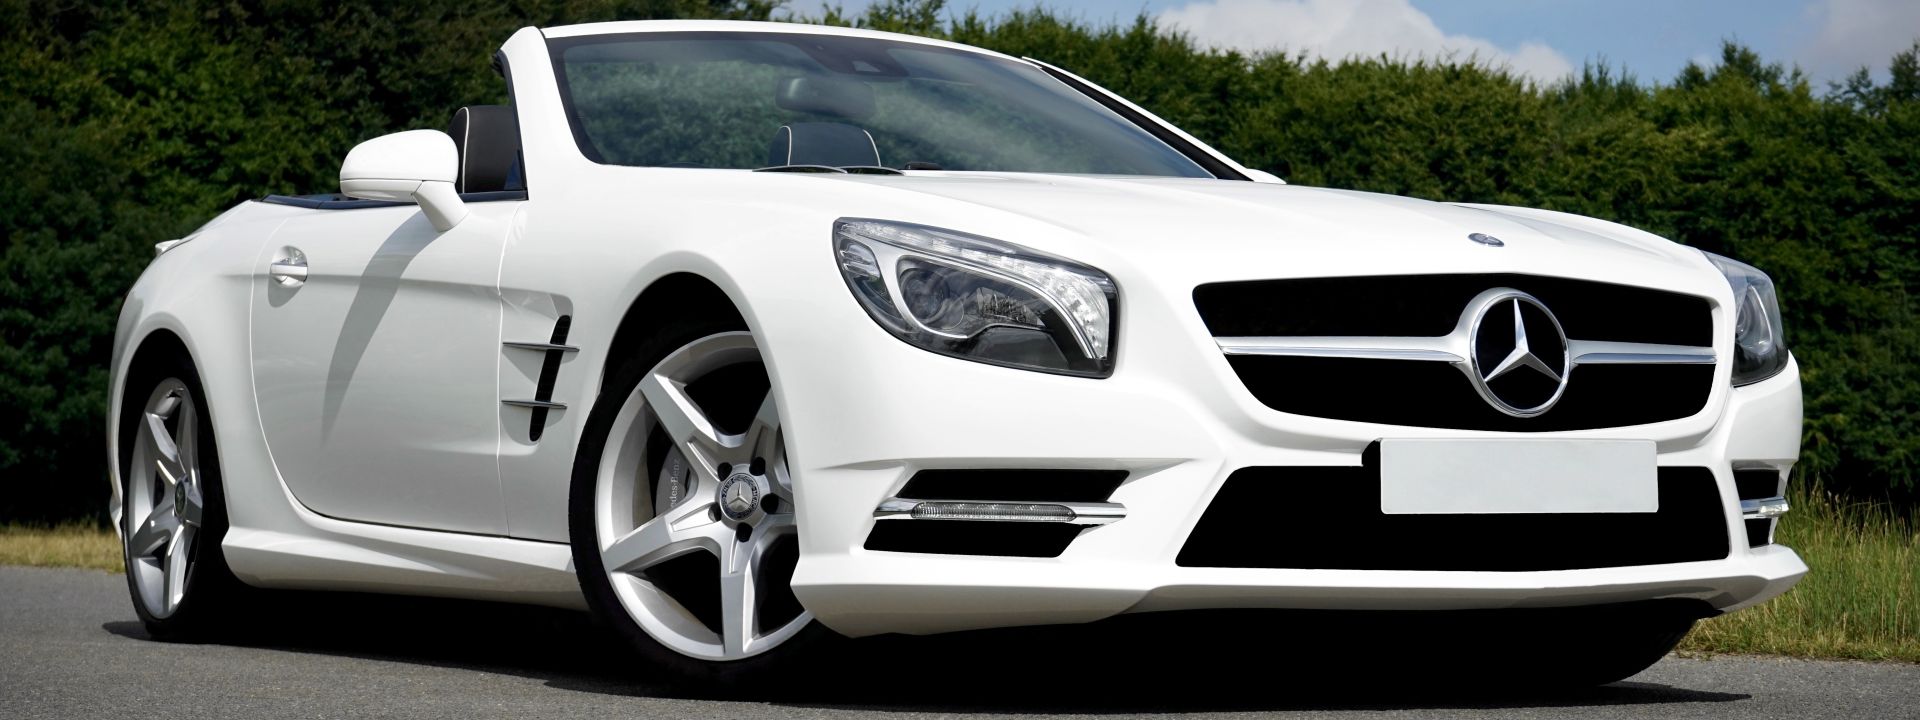 Mercedes car lease is available for SL class